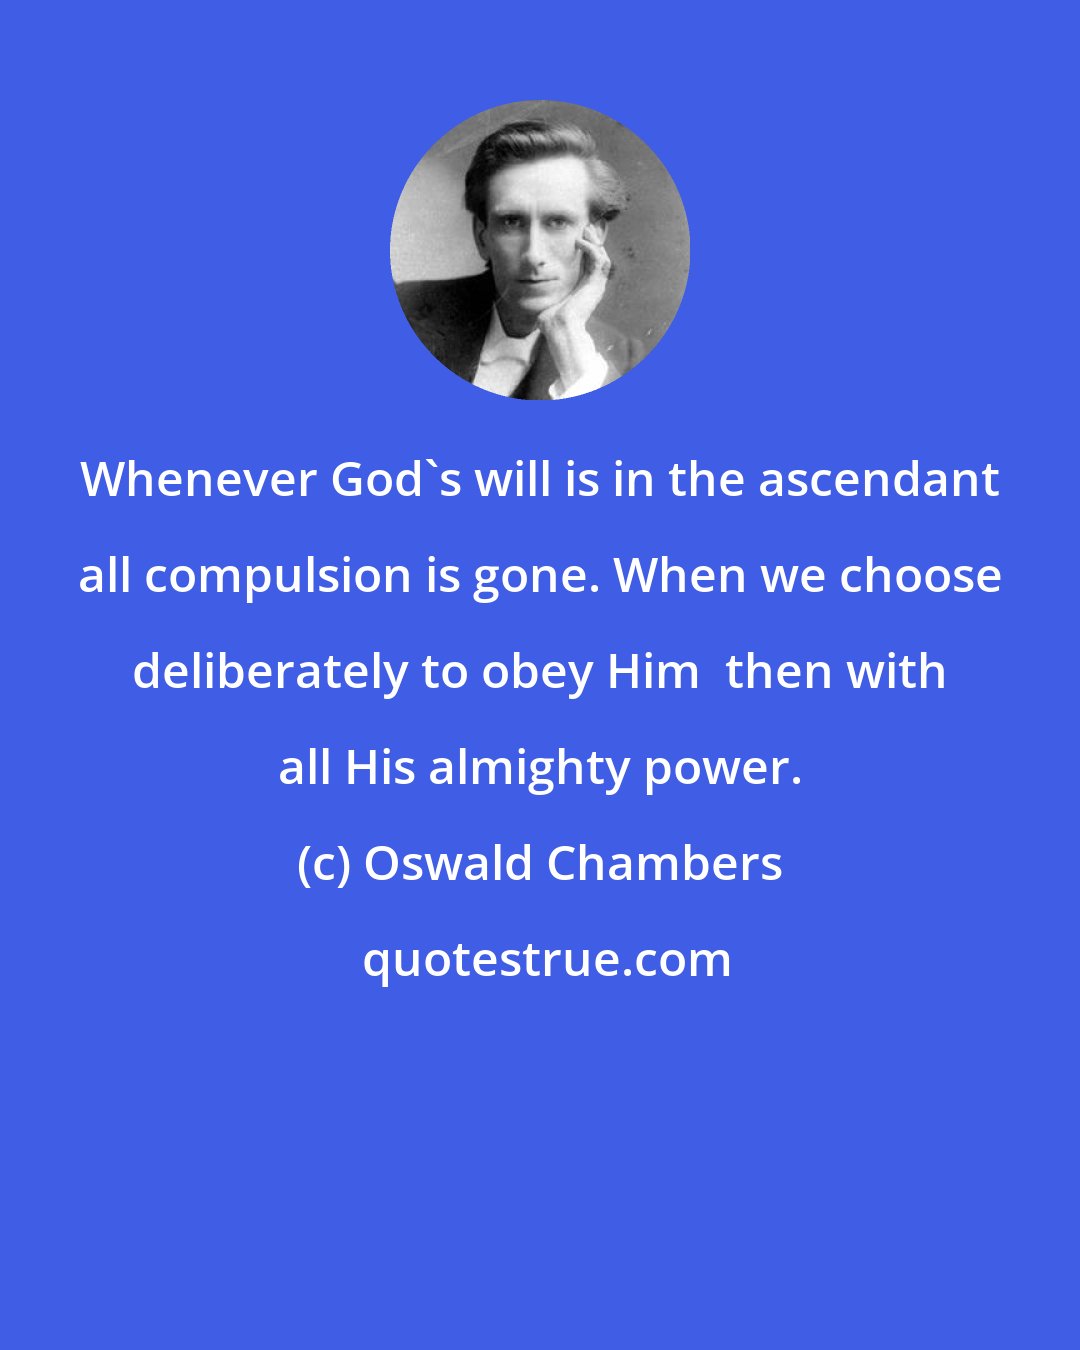 Oswald Chambers: Whenever God's will is in the ascendant all compulsion is gone. When we choose deliberately to obey Him  then with all His almighty power.